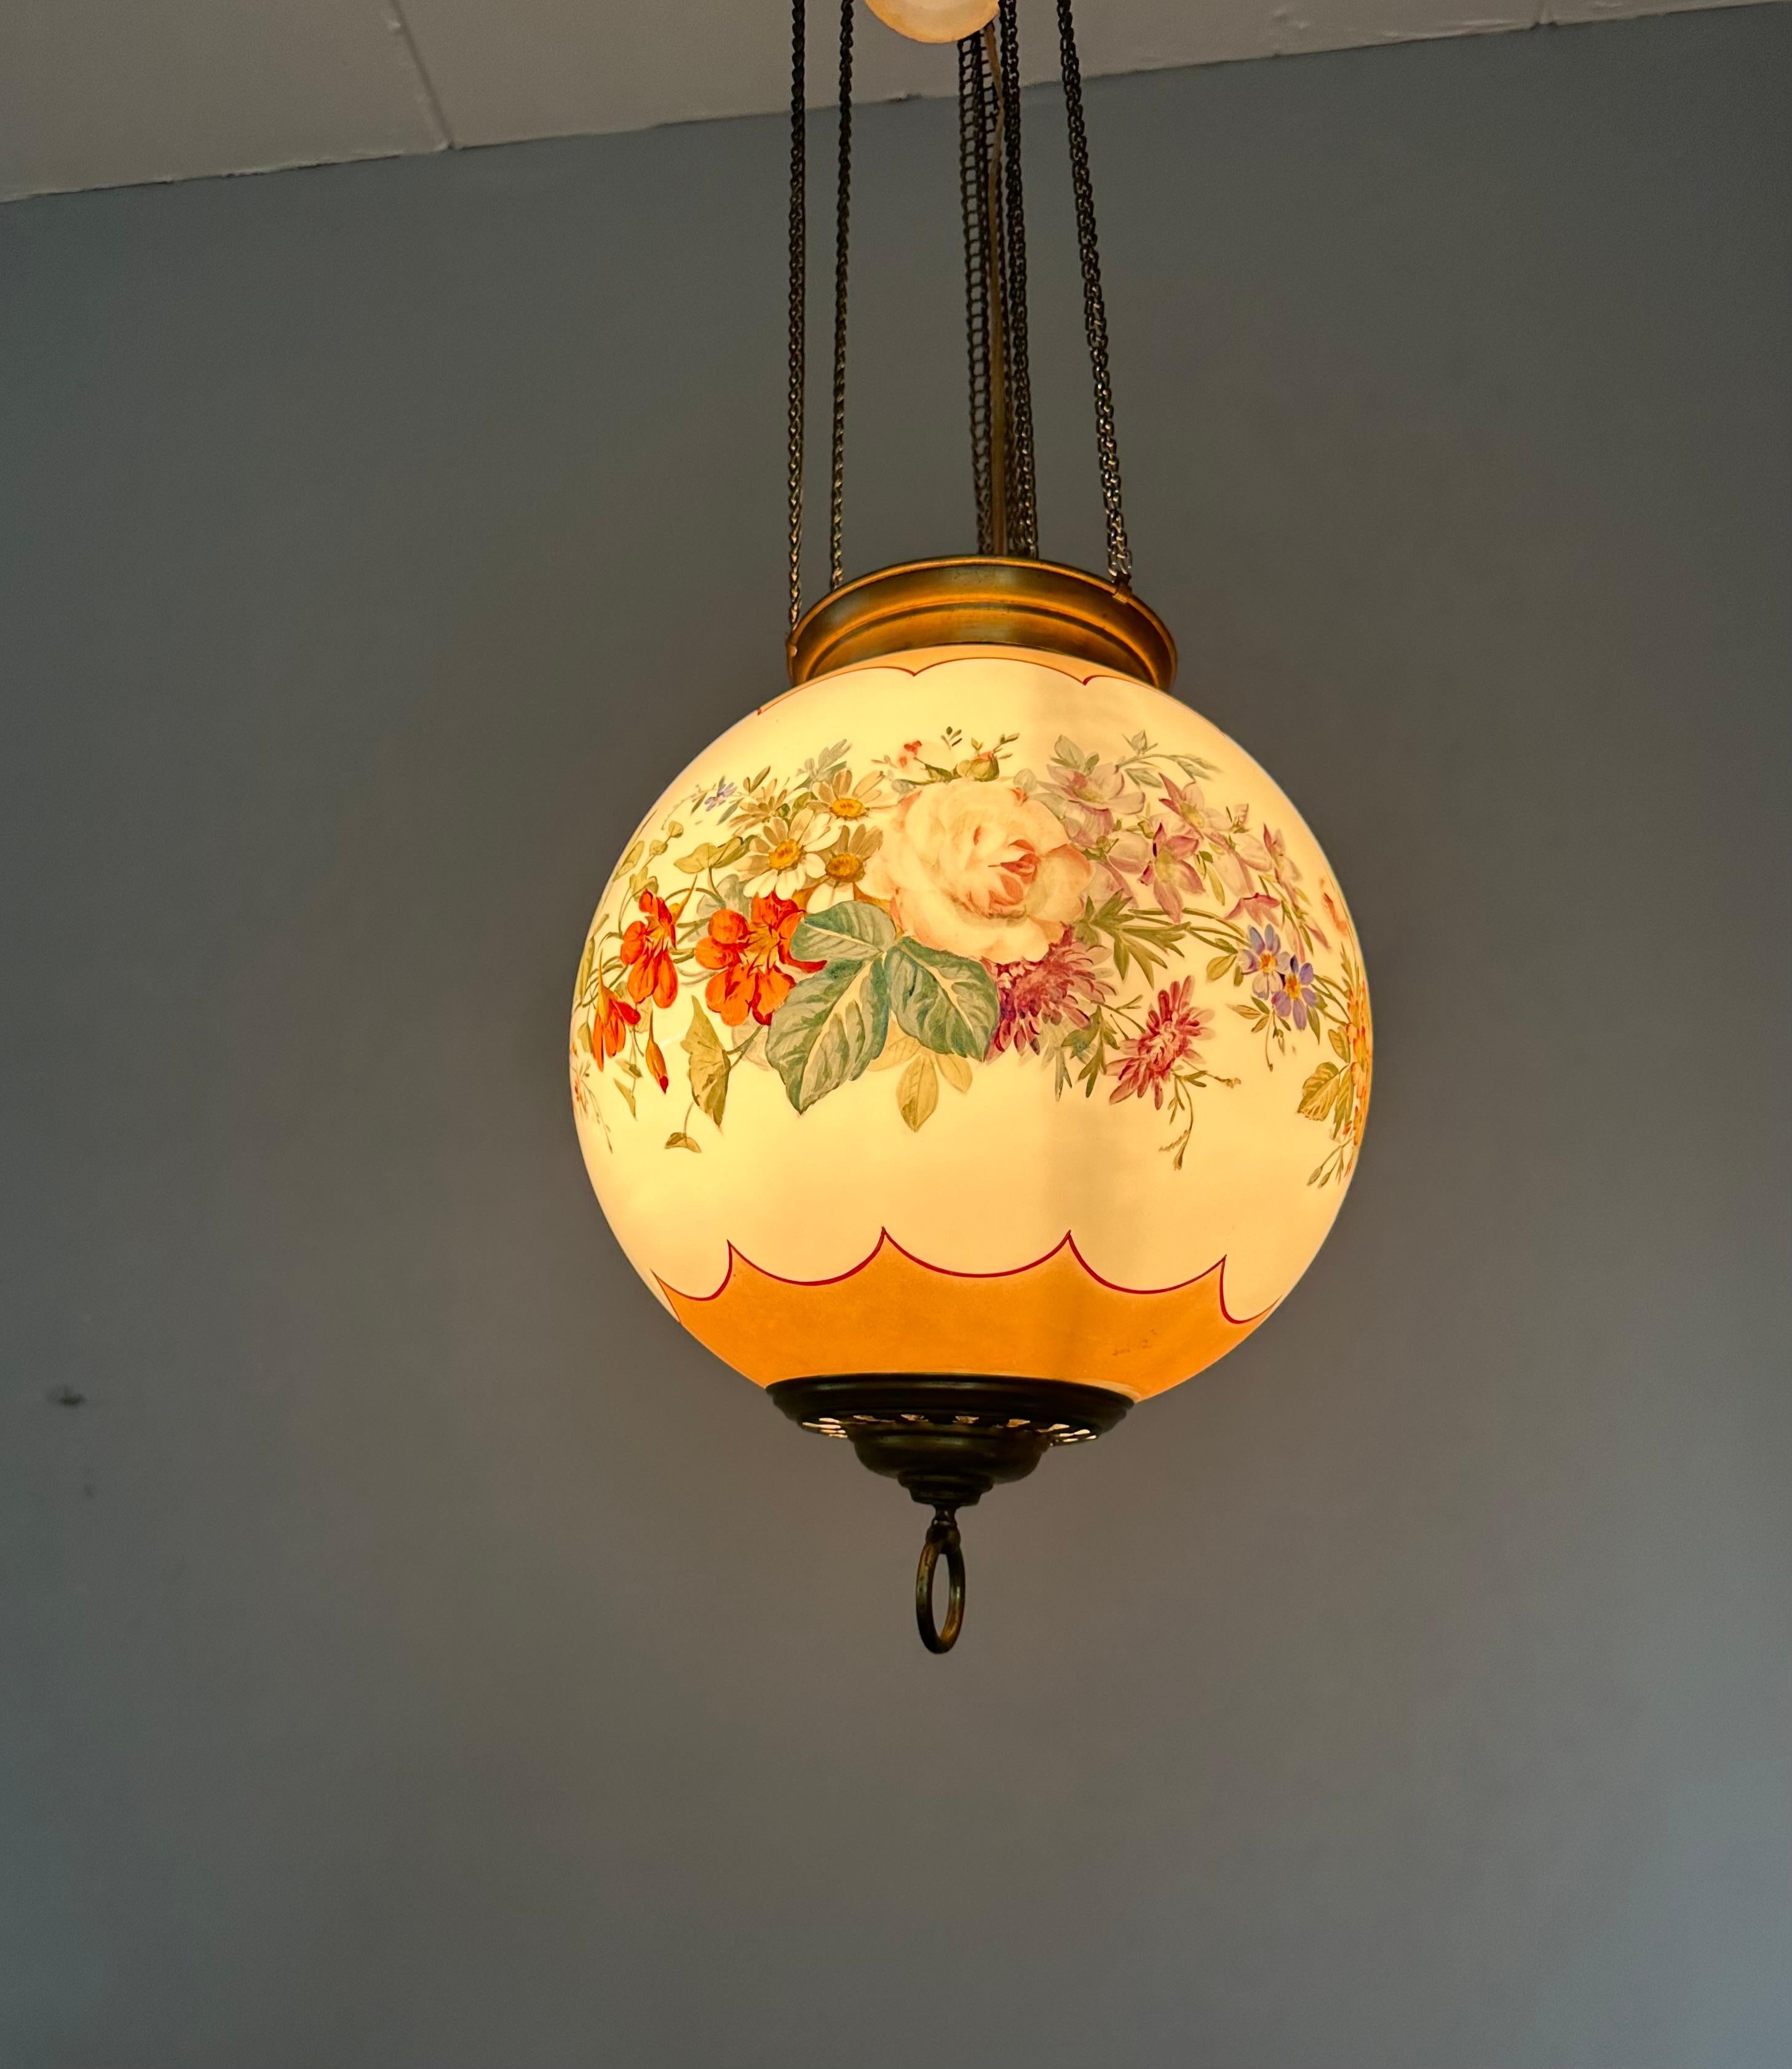 Antique Round Opaline Glass Shade Pendant Light with Wreath of Flowers Decor For Sale 9